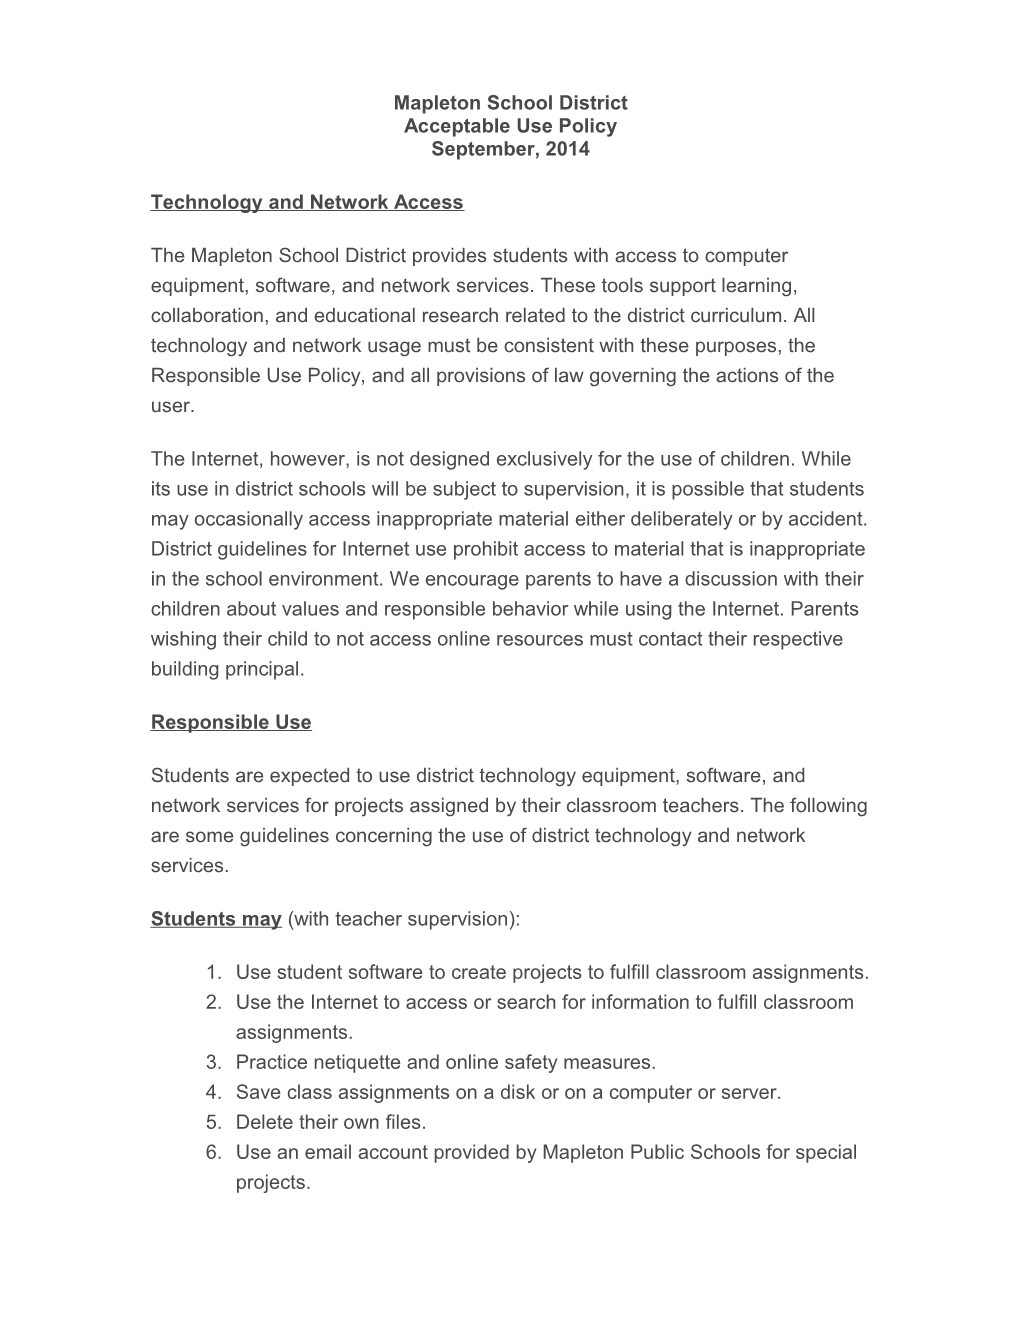 Technology and Network Access